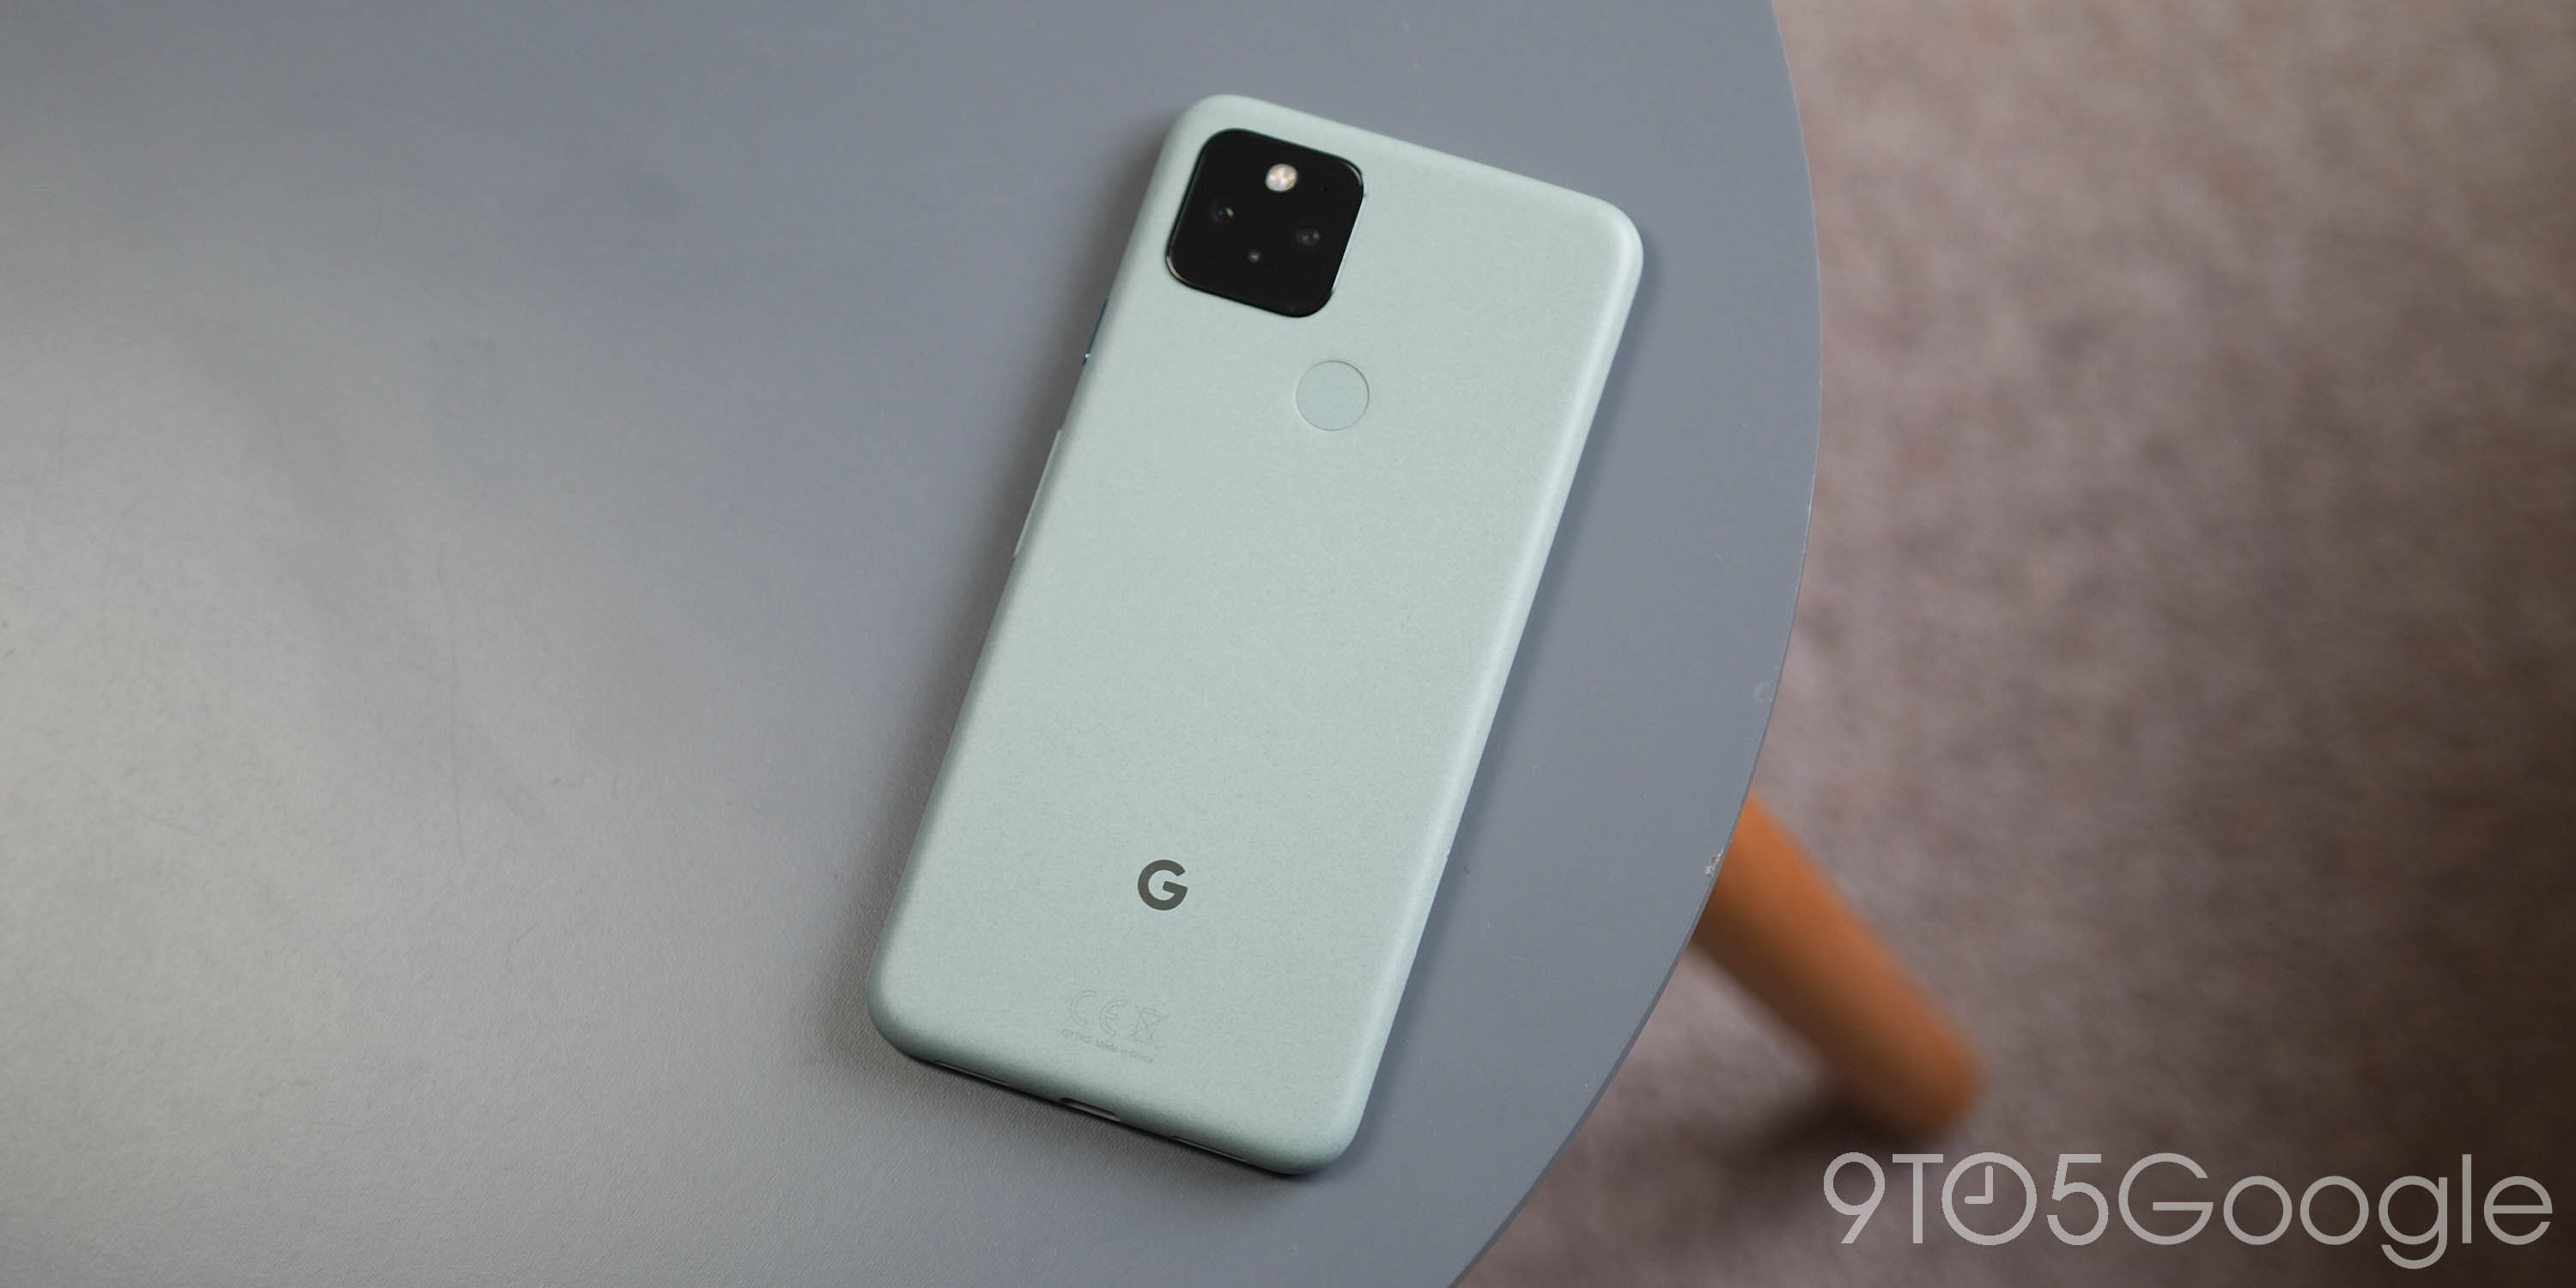 Google Pixel 5 can be repaired same-day at all uBreakiFix locations in the US - 9to5Google